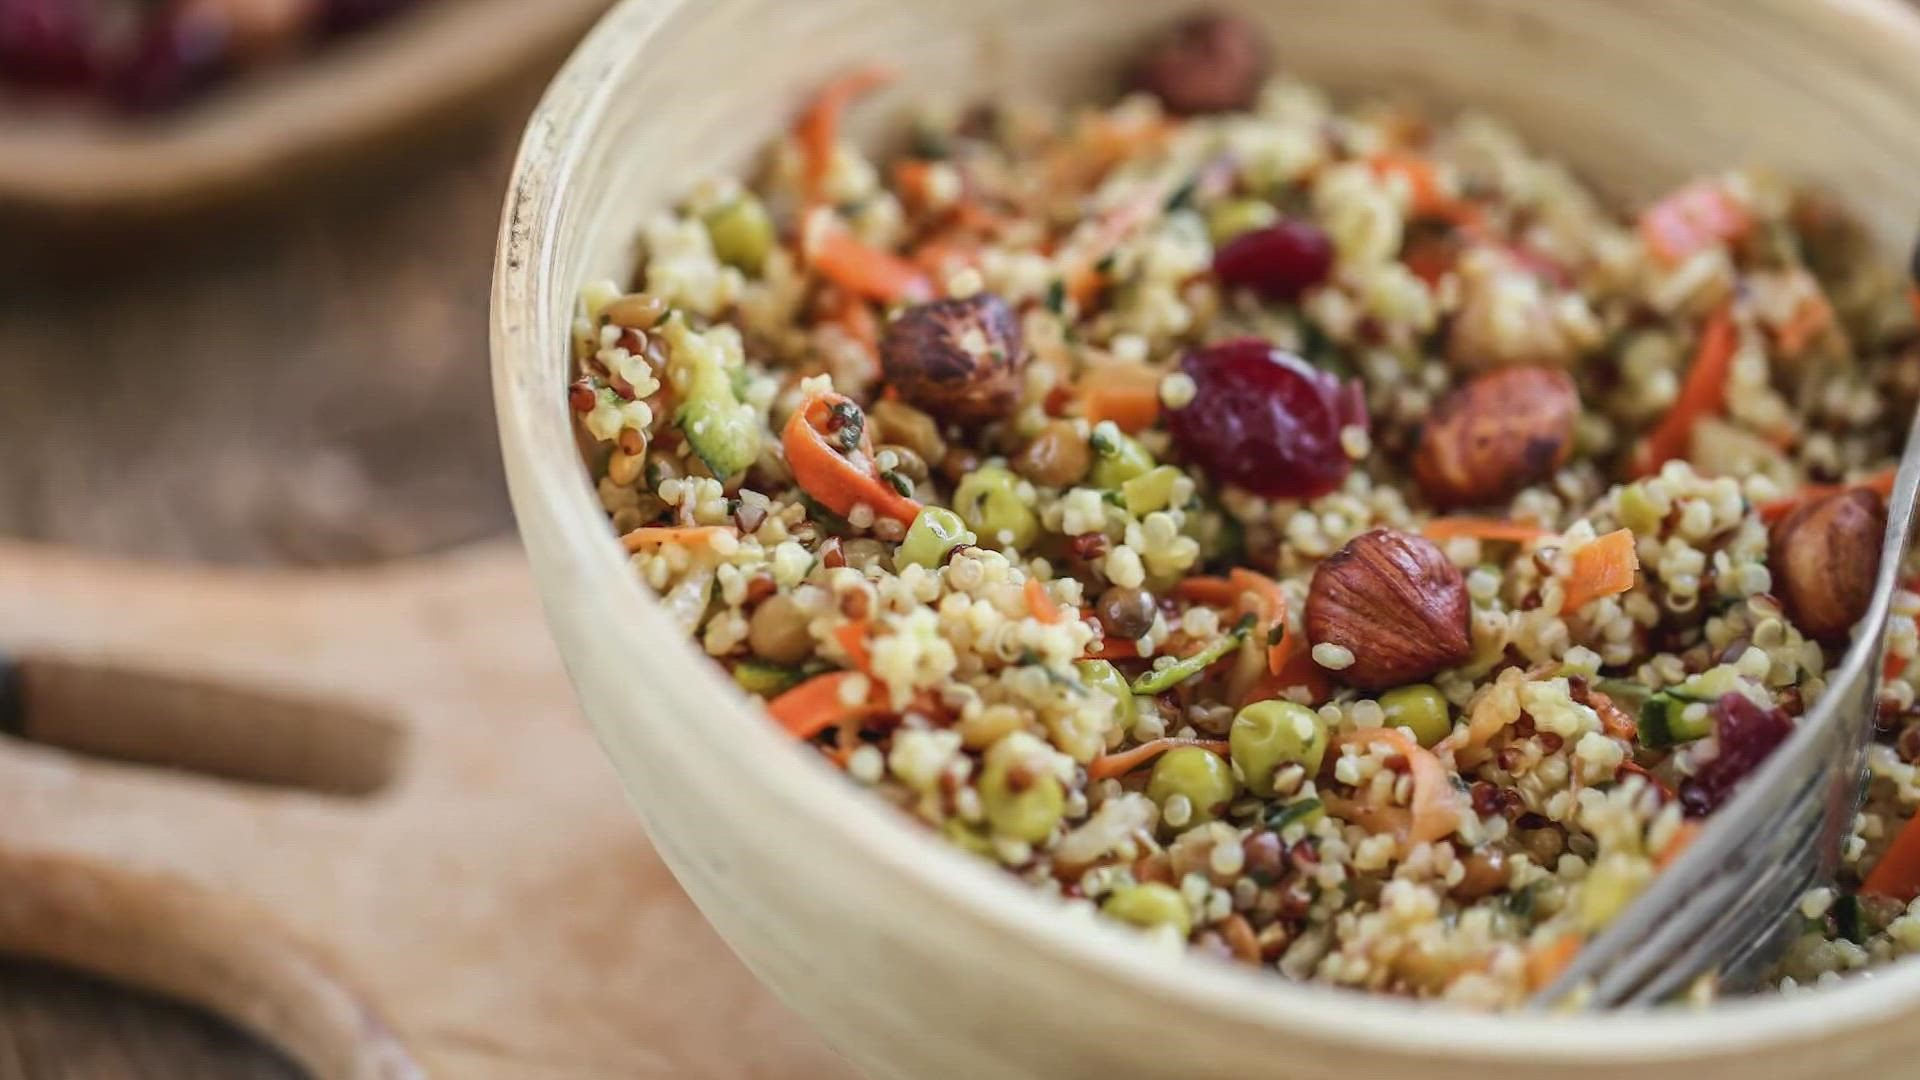 Here are some tips on using quinoa in your recipes.